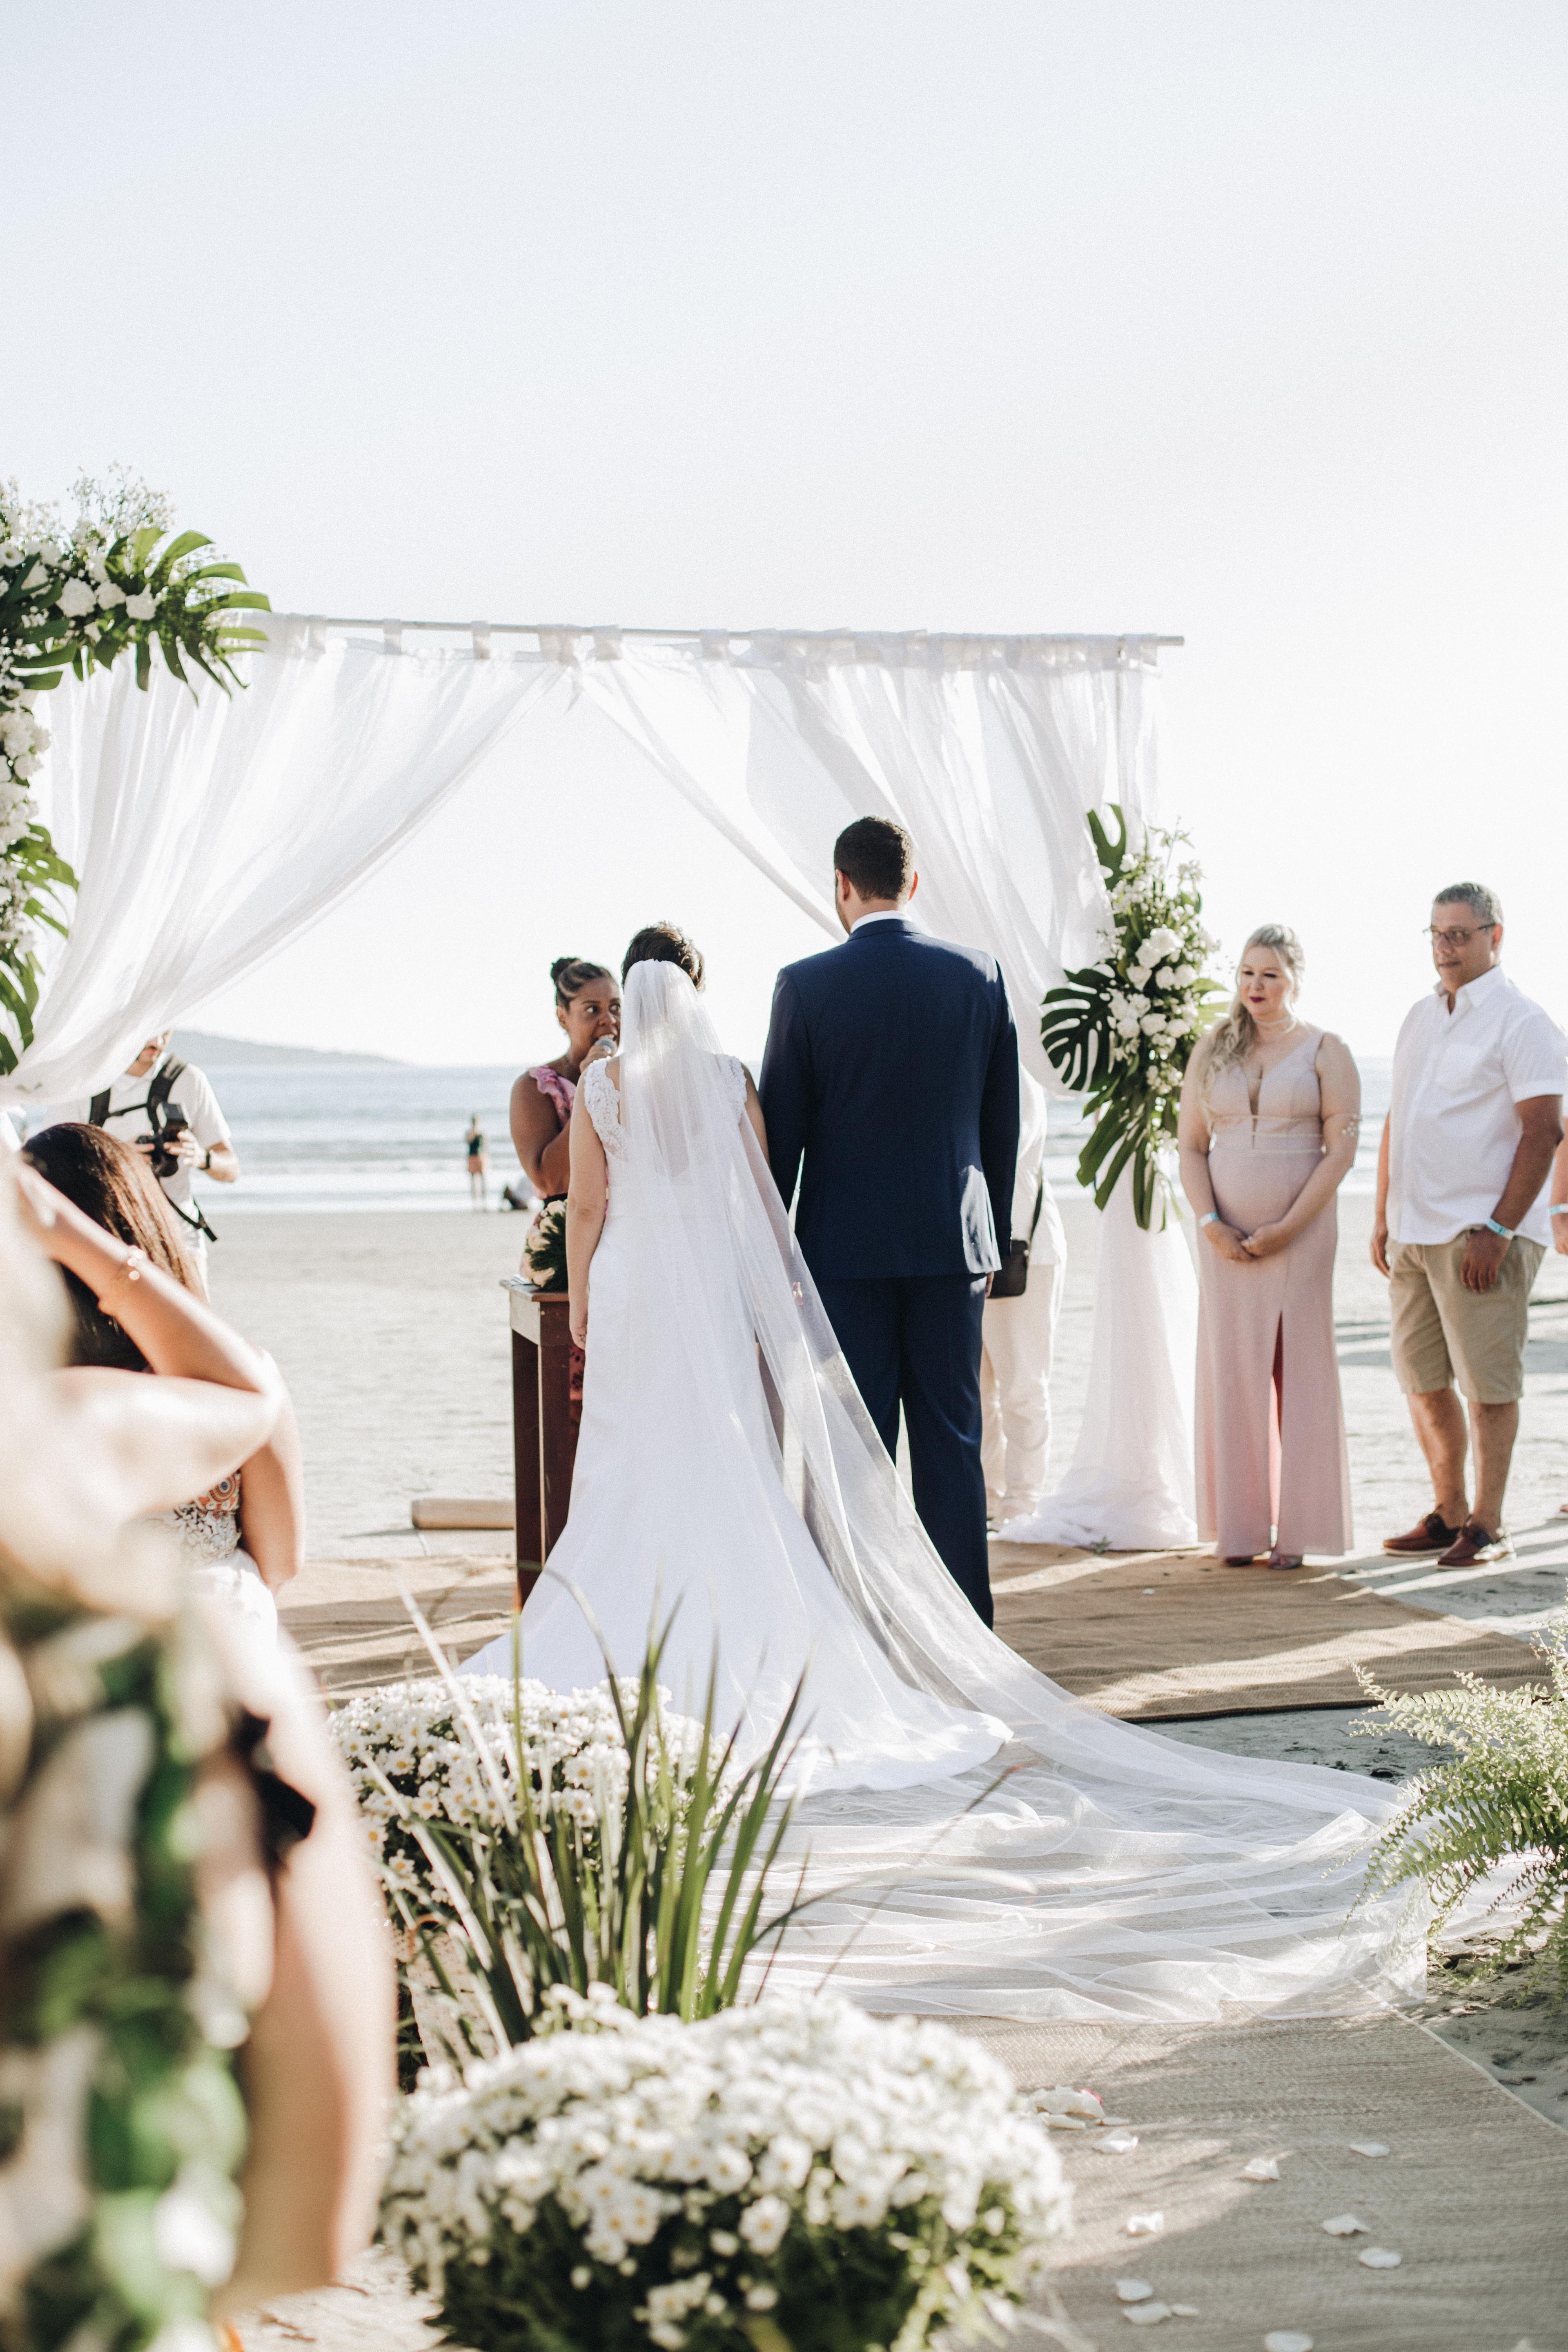 Beach Wedding Planning 101 - Essential Tips for Pulling Off a Seaside Ceremony